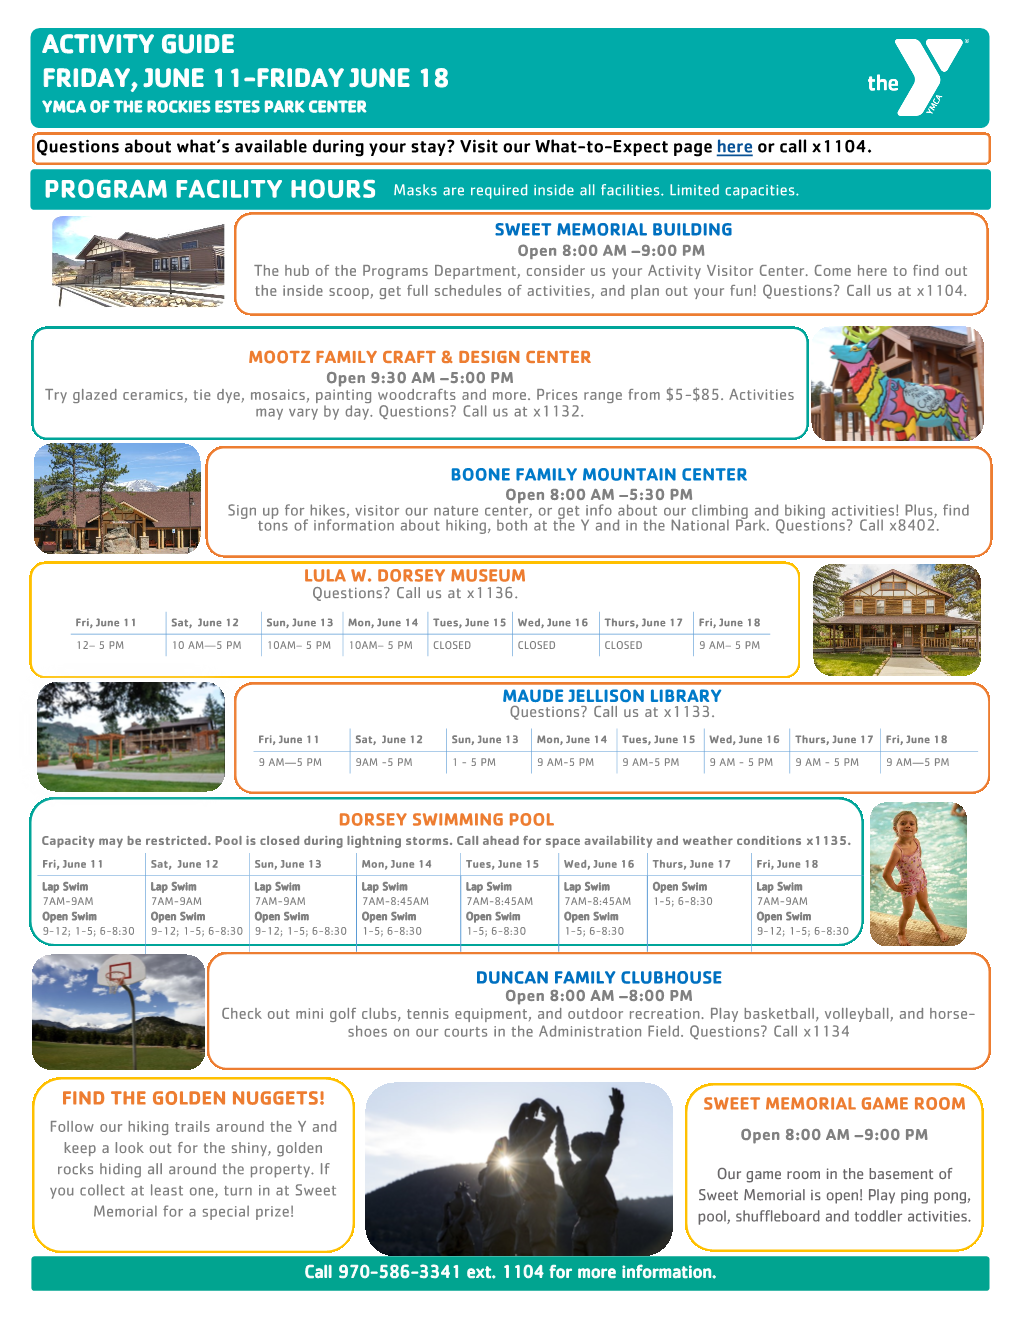 JUNE 11-FRIDAY JUNE 18 YMCA of the ROCKIES ESTES PARK CENTER Questions About What’S Available During Your Stay? Visit Our What-To-Expect Page Here Or Call X1104